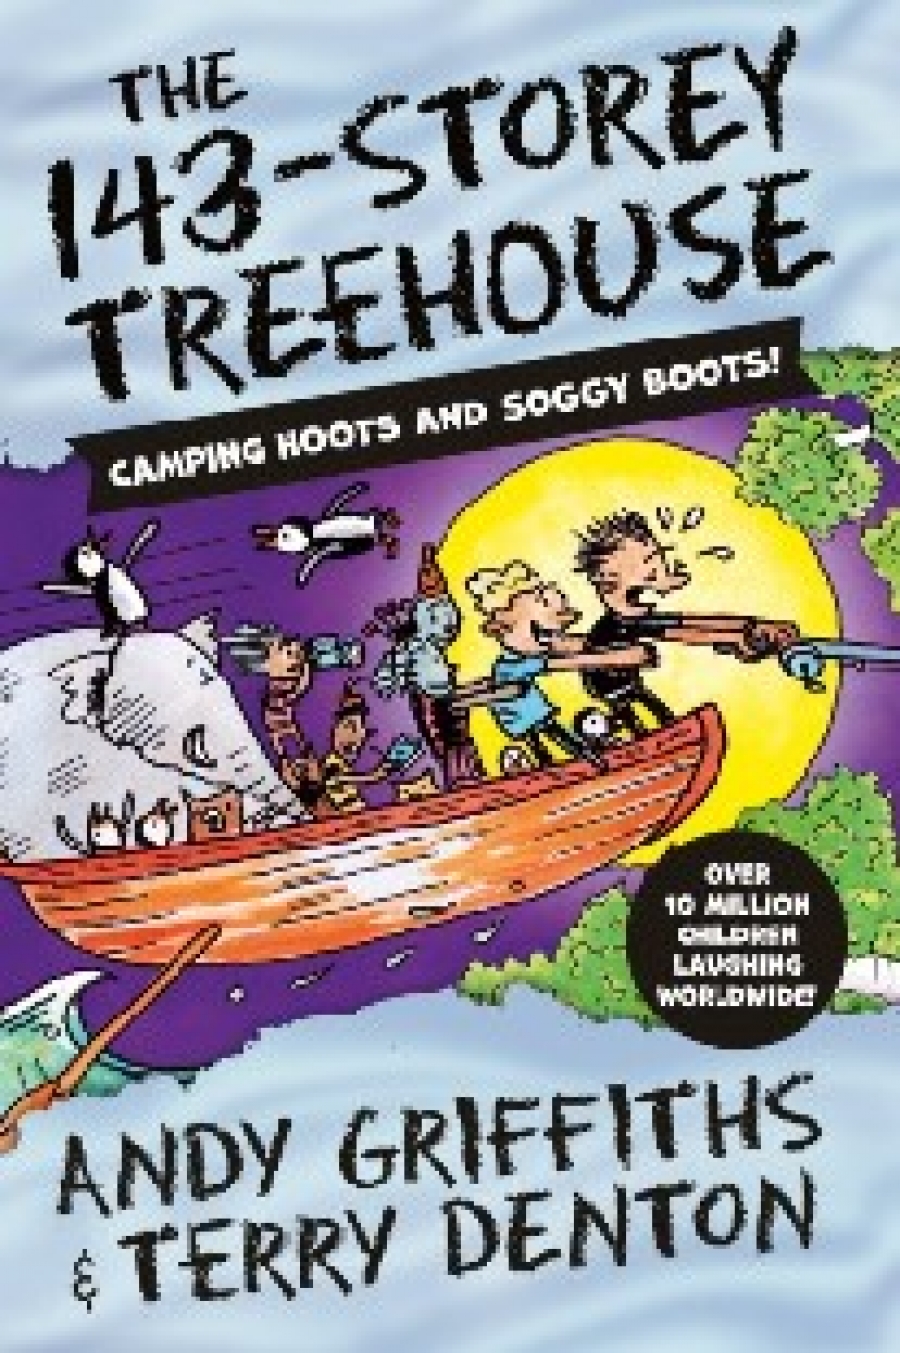 Andy, Griffiths 143-storey treehouse 